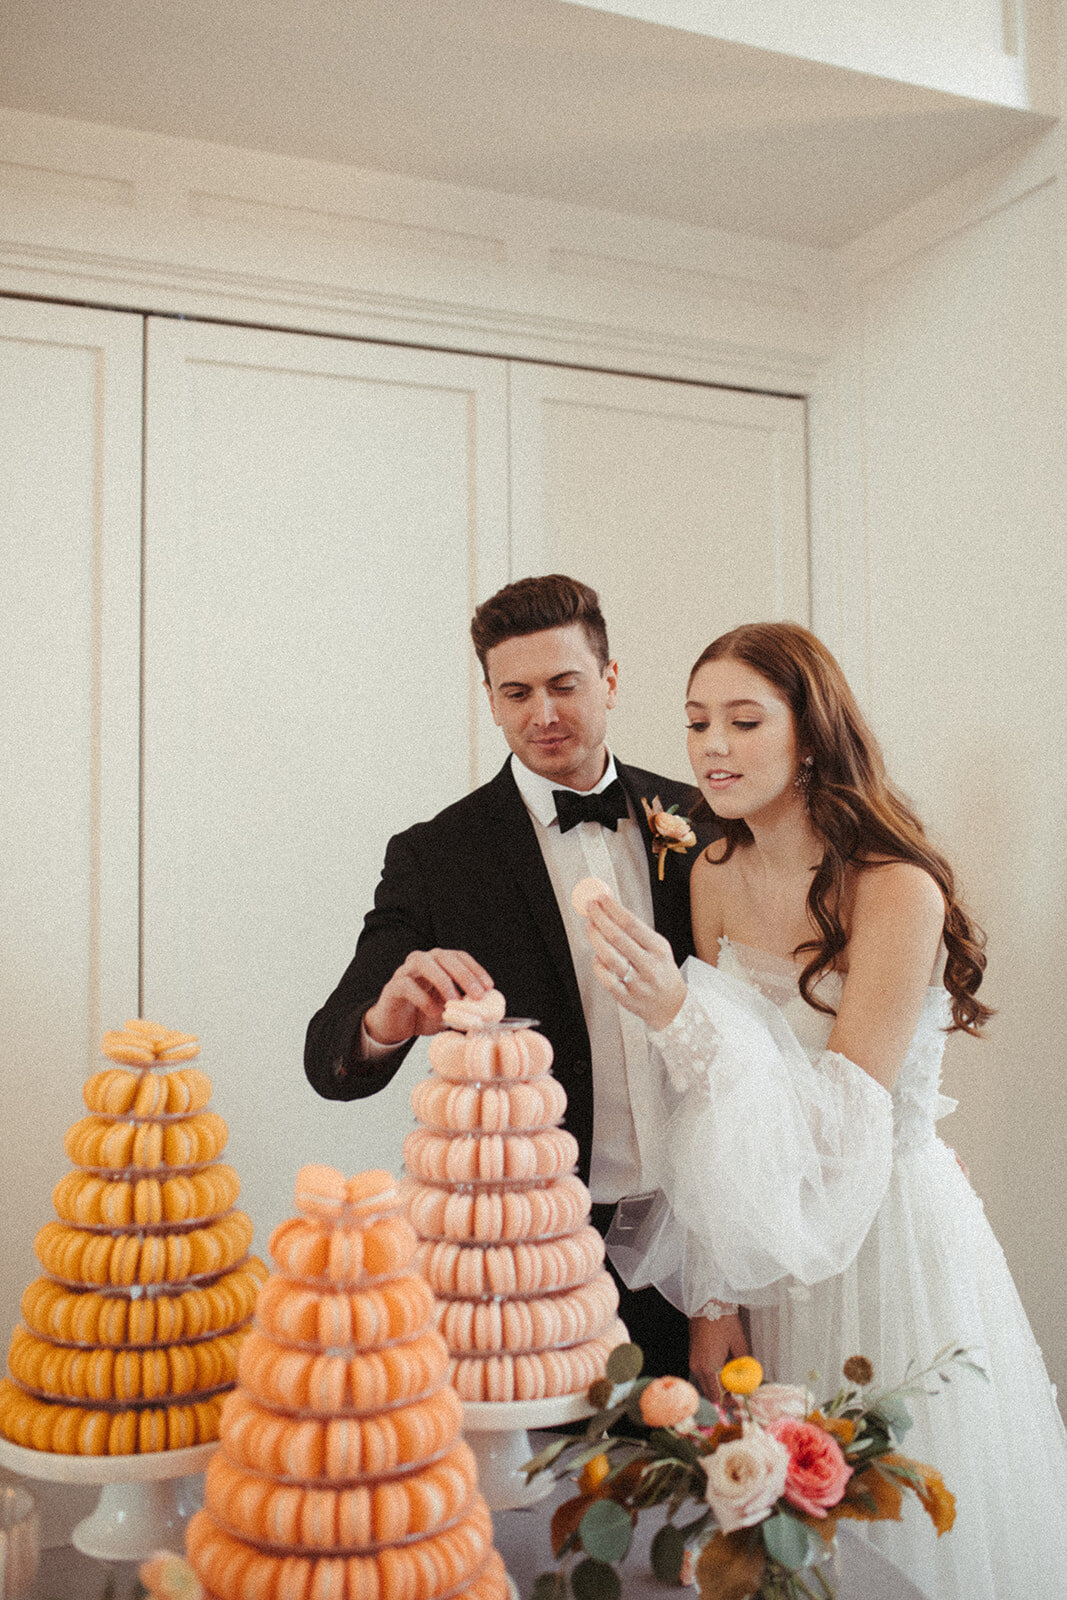 A bride and groom wearing a white wedding gown and black tuxedo lean into a dessert table filled with macarons.